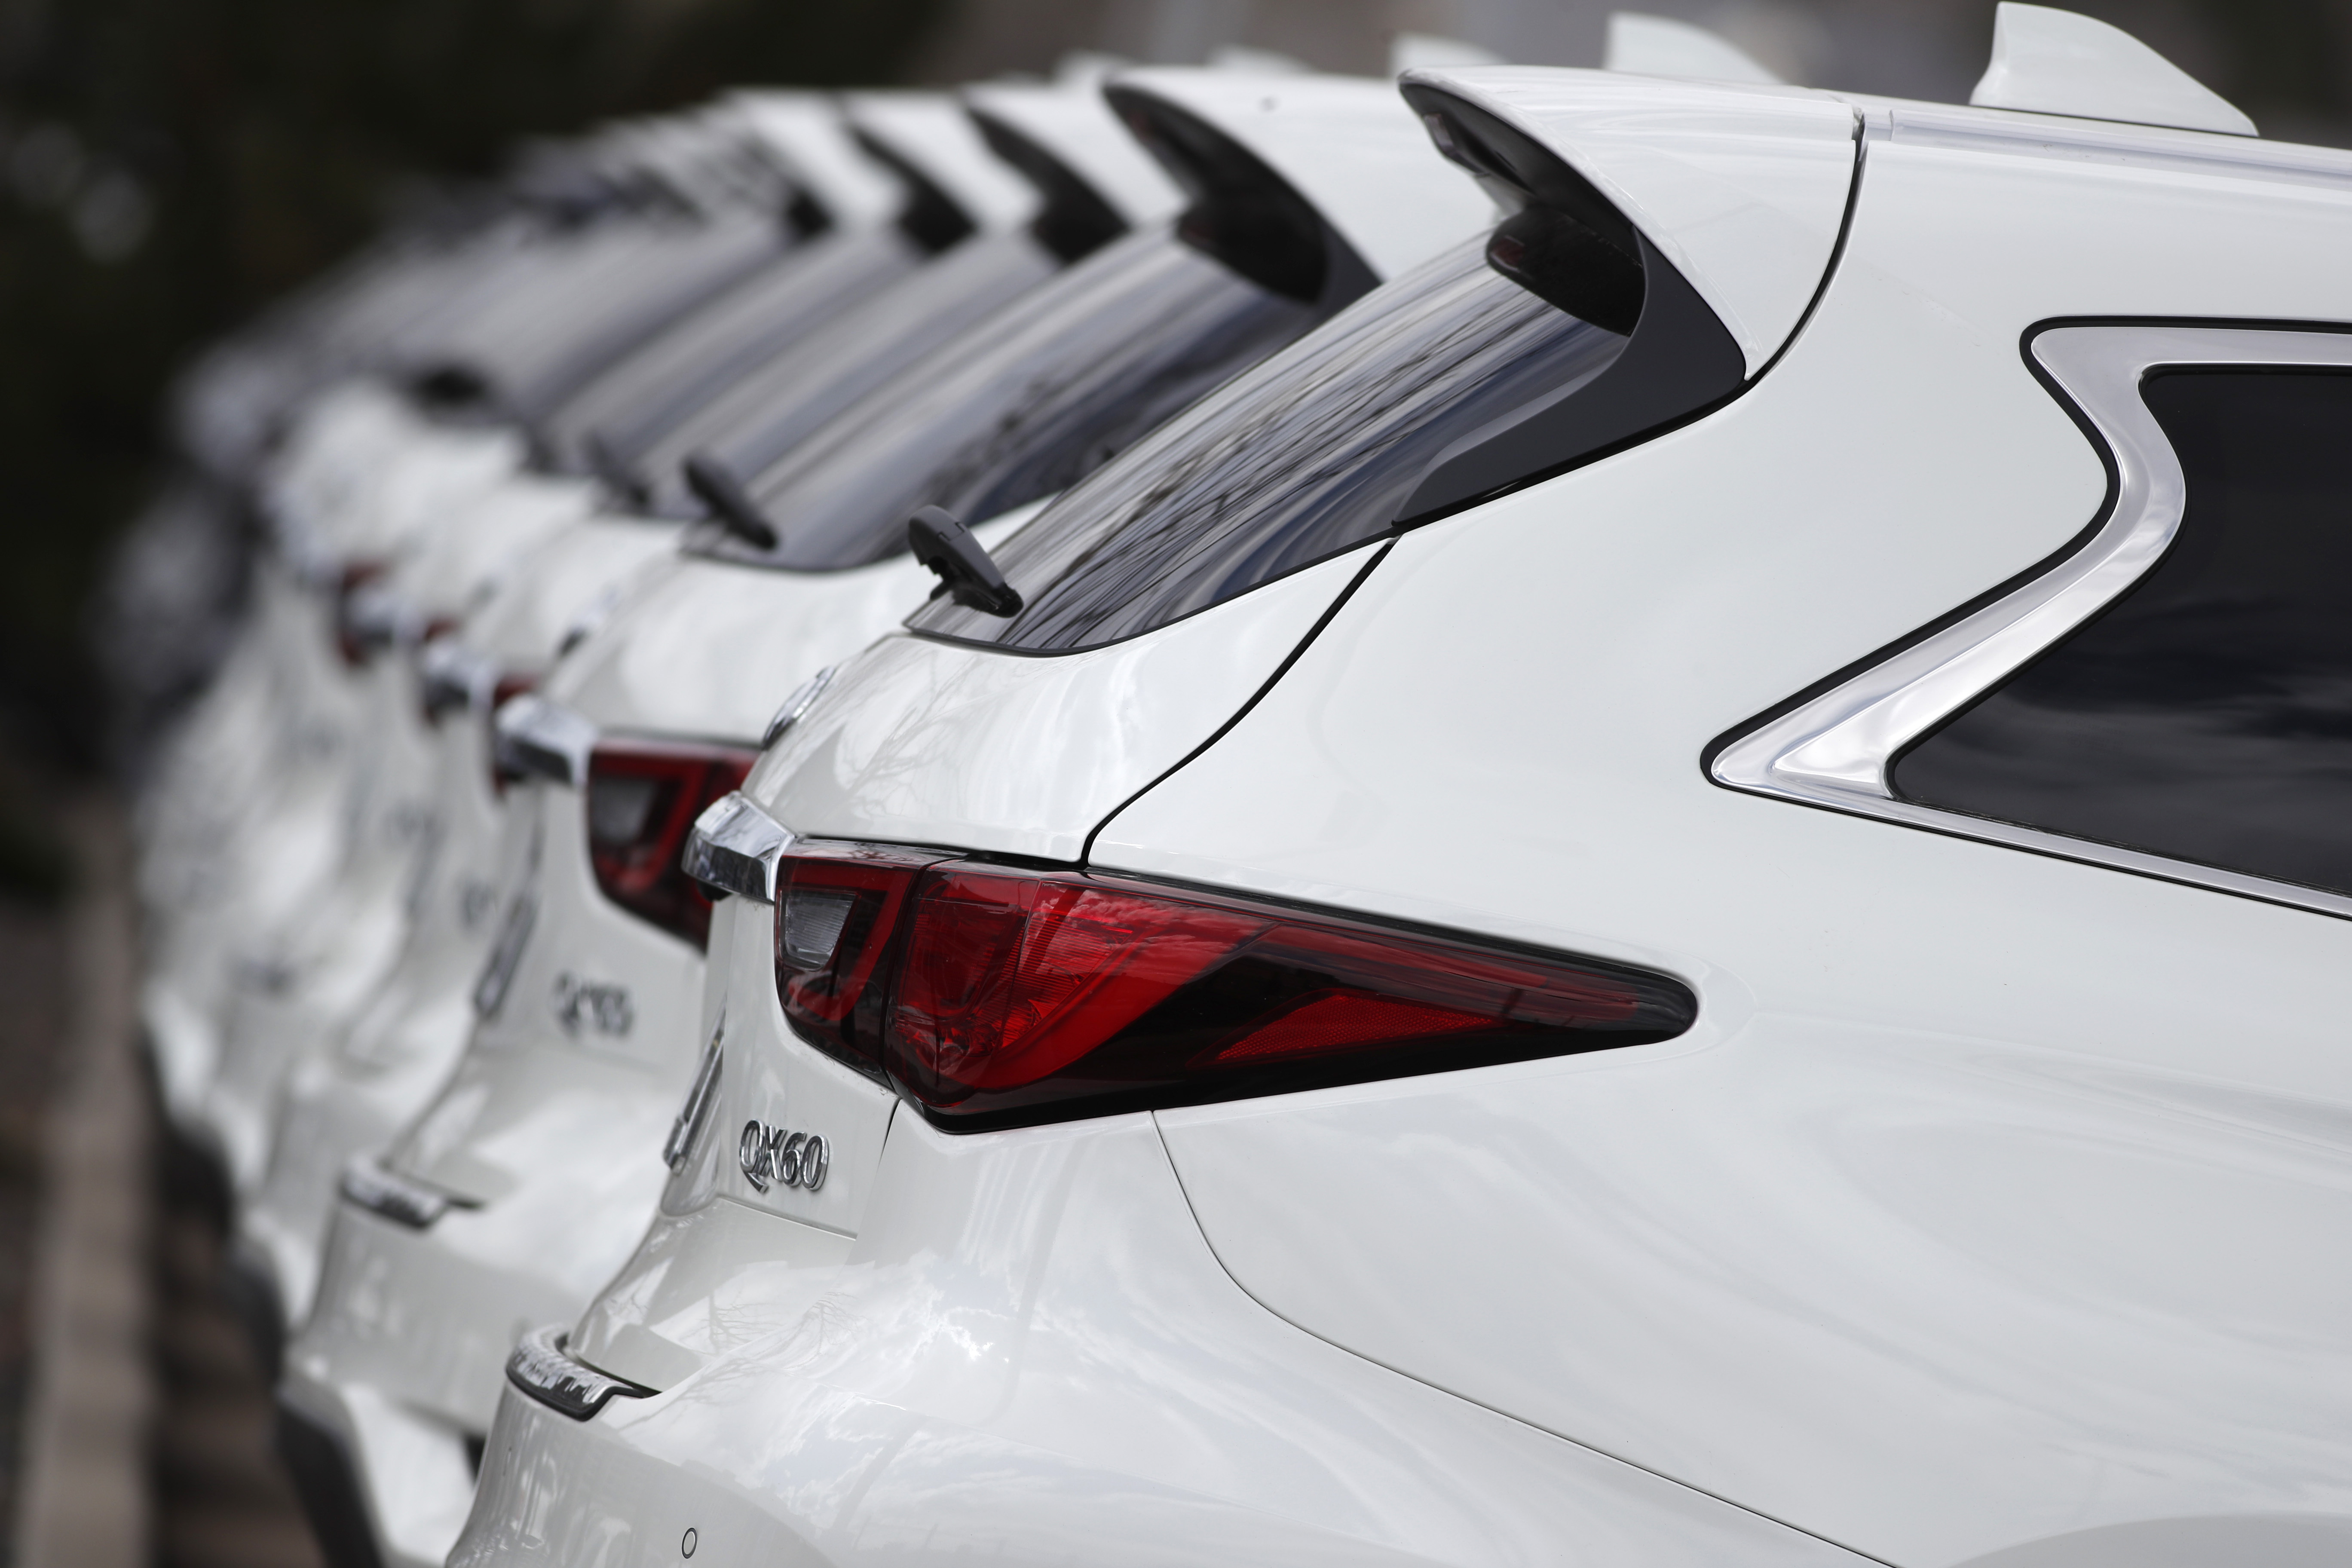 In this Sunday, April 5, 2020, photograph, a long row of 2020 QX60 sports-utility vehicles sits at an Infinti dealership in Highlands Ranch, Colo. (AP Photo/David Zalubowski)